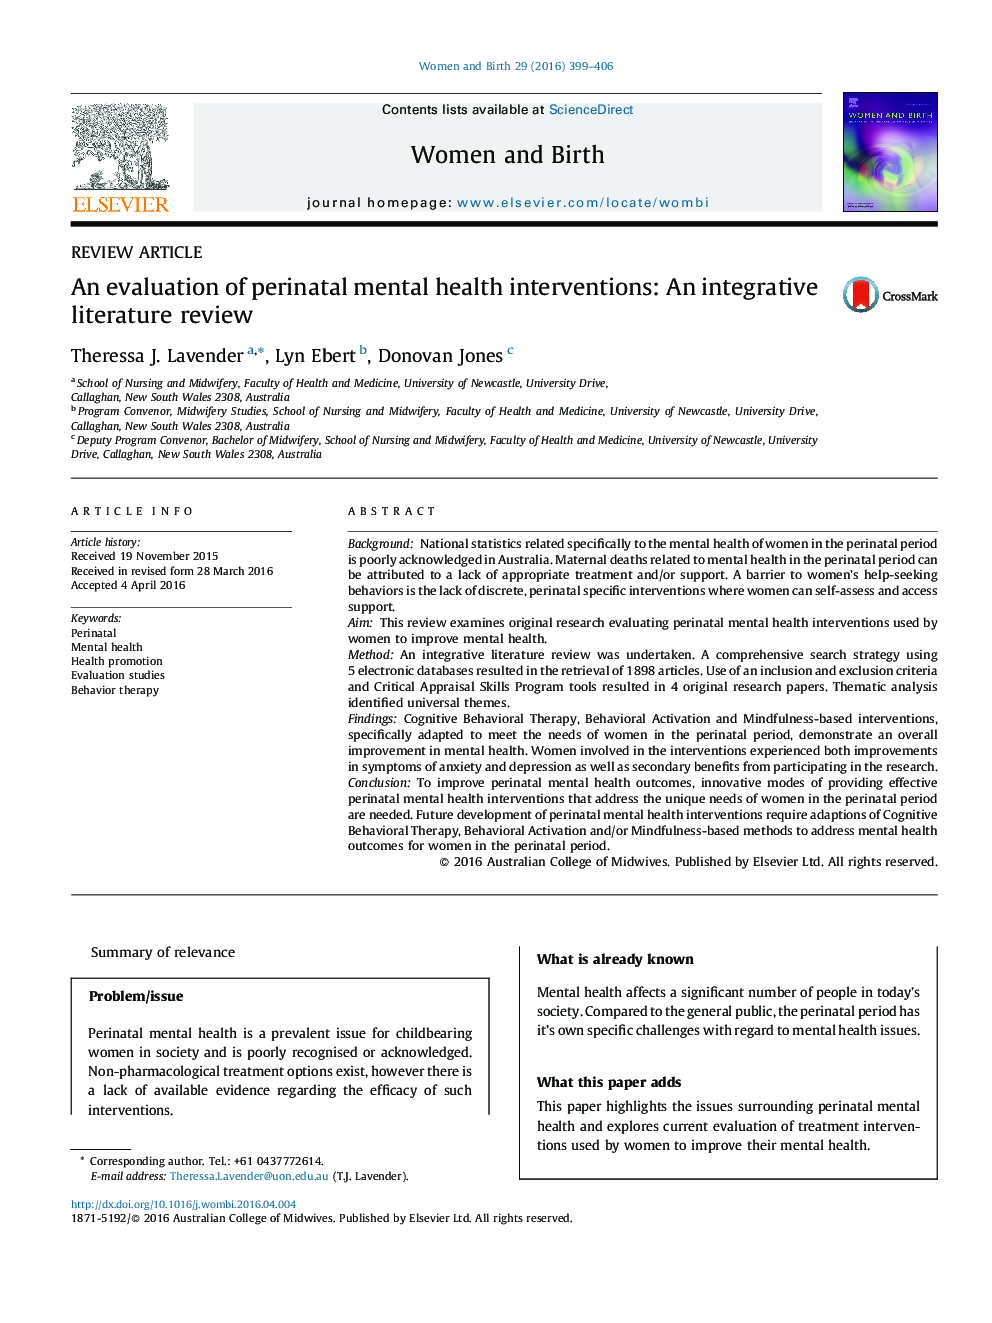 An evaluation of perinatal mental health interventions: An integrative literature review